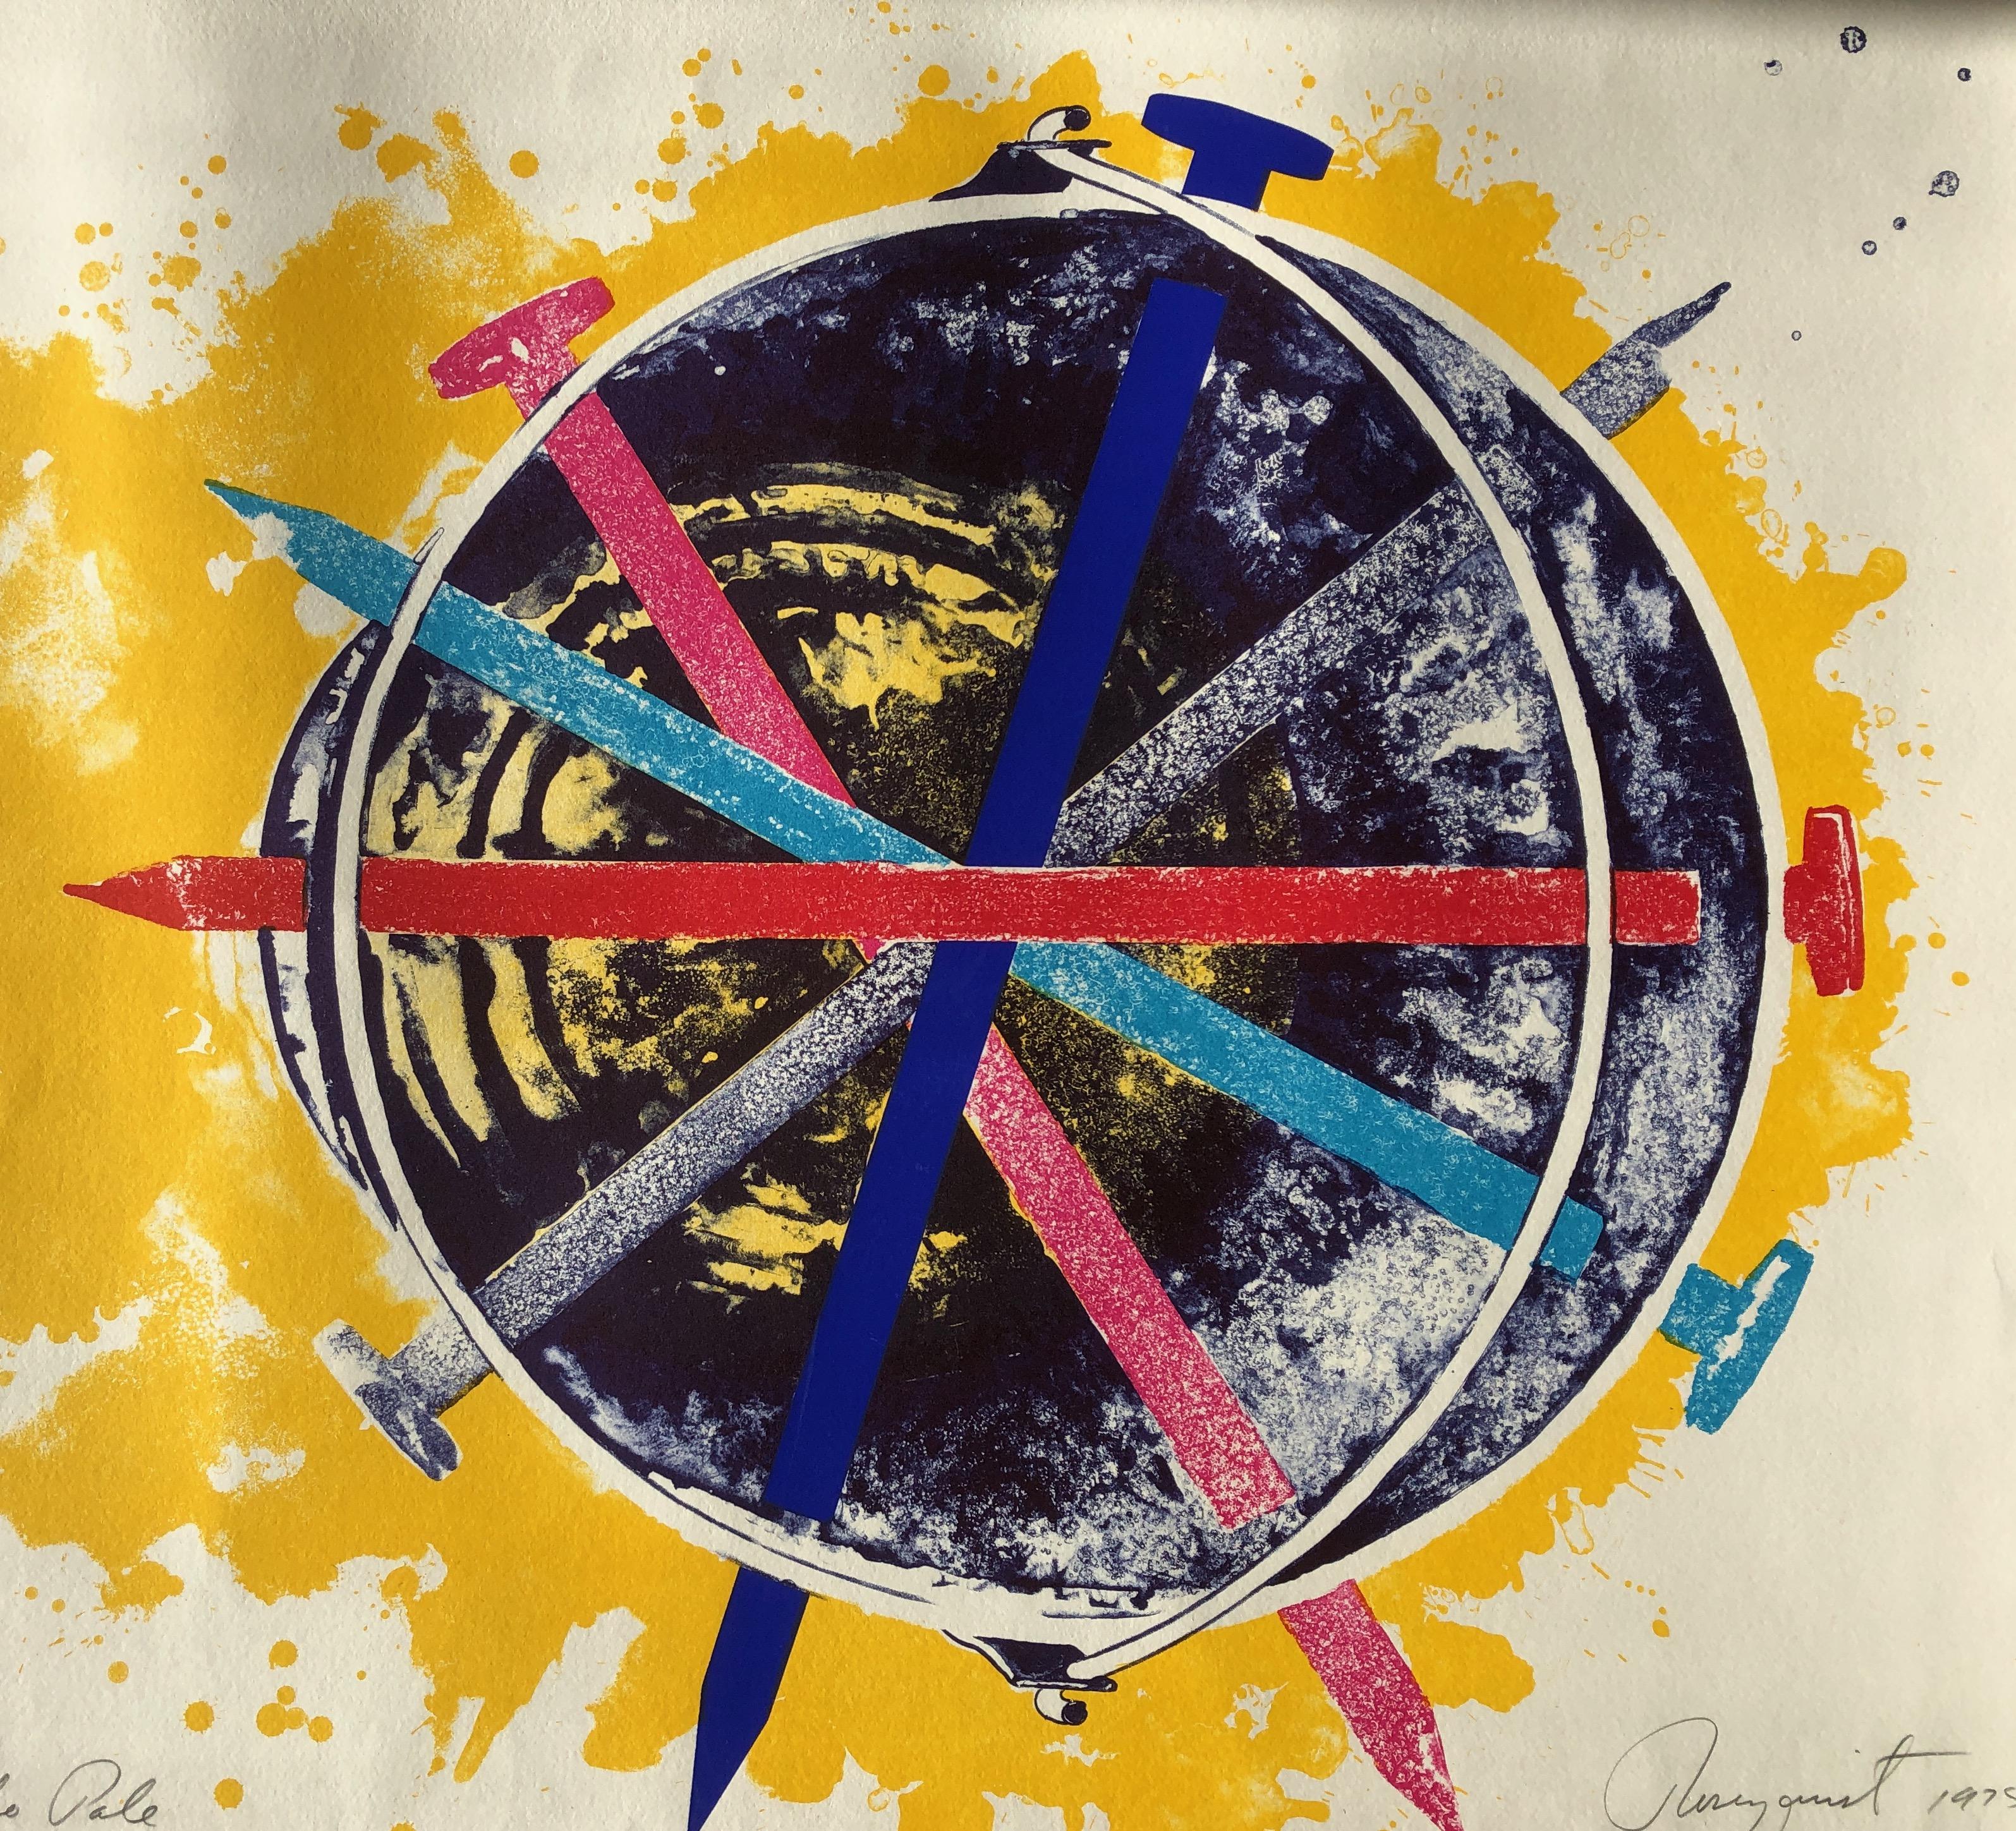 James Rosenquist Abstract Print - Echo Pale, From Mirrors of the Mind Portfolio, 1975 